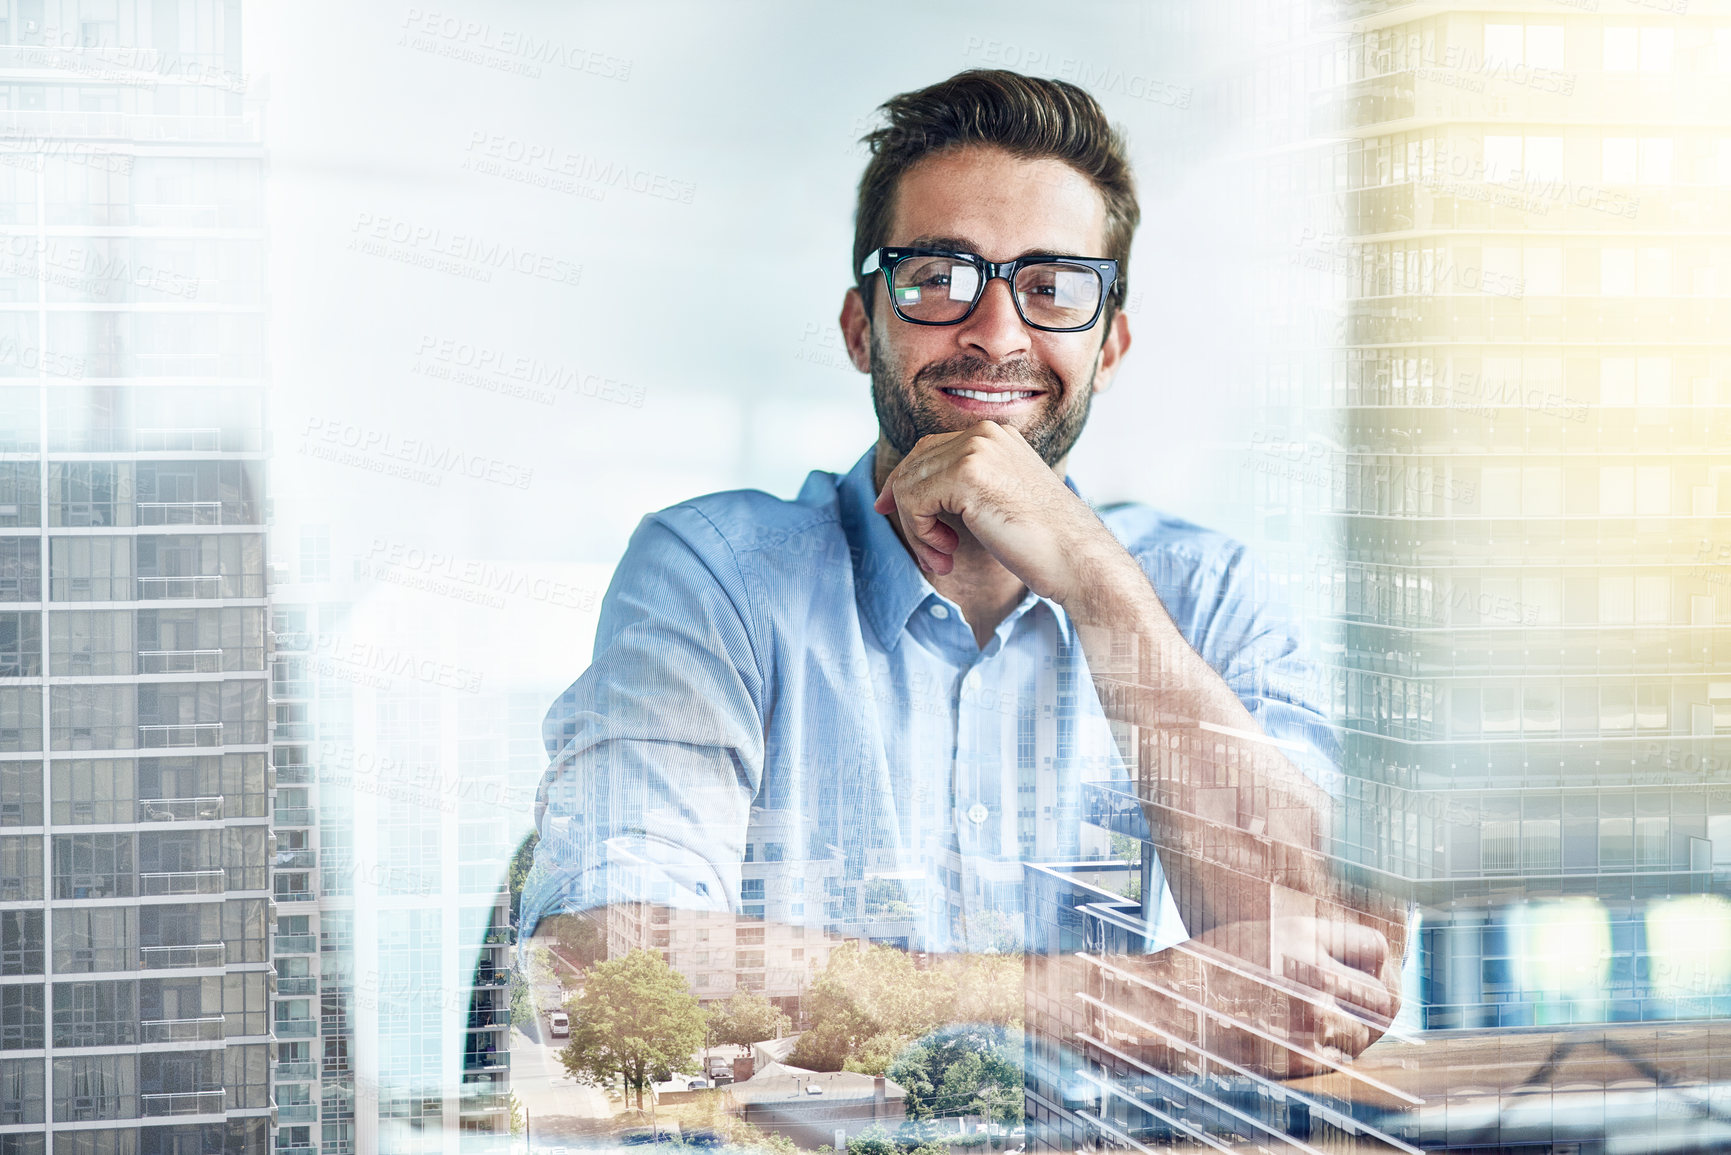 Buy stock photo Multiple exposure shot of a mature businessman sitting at his office desk superimposed over a cityscape